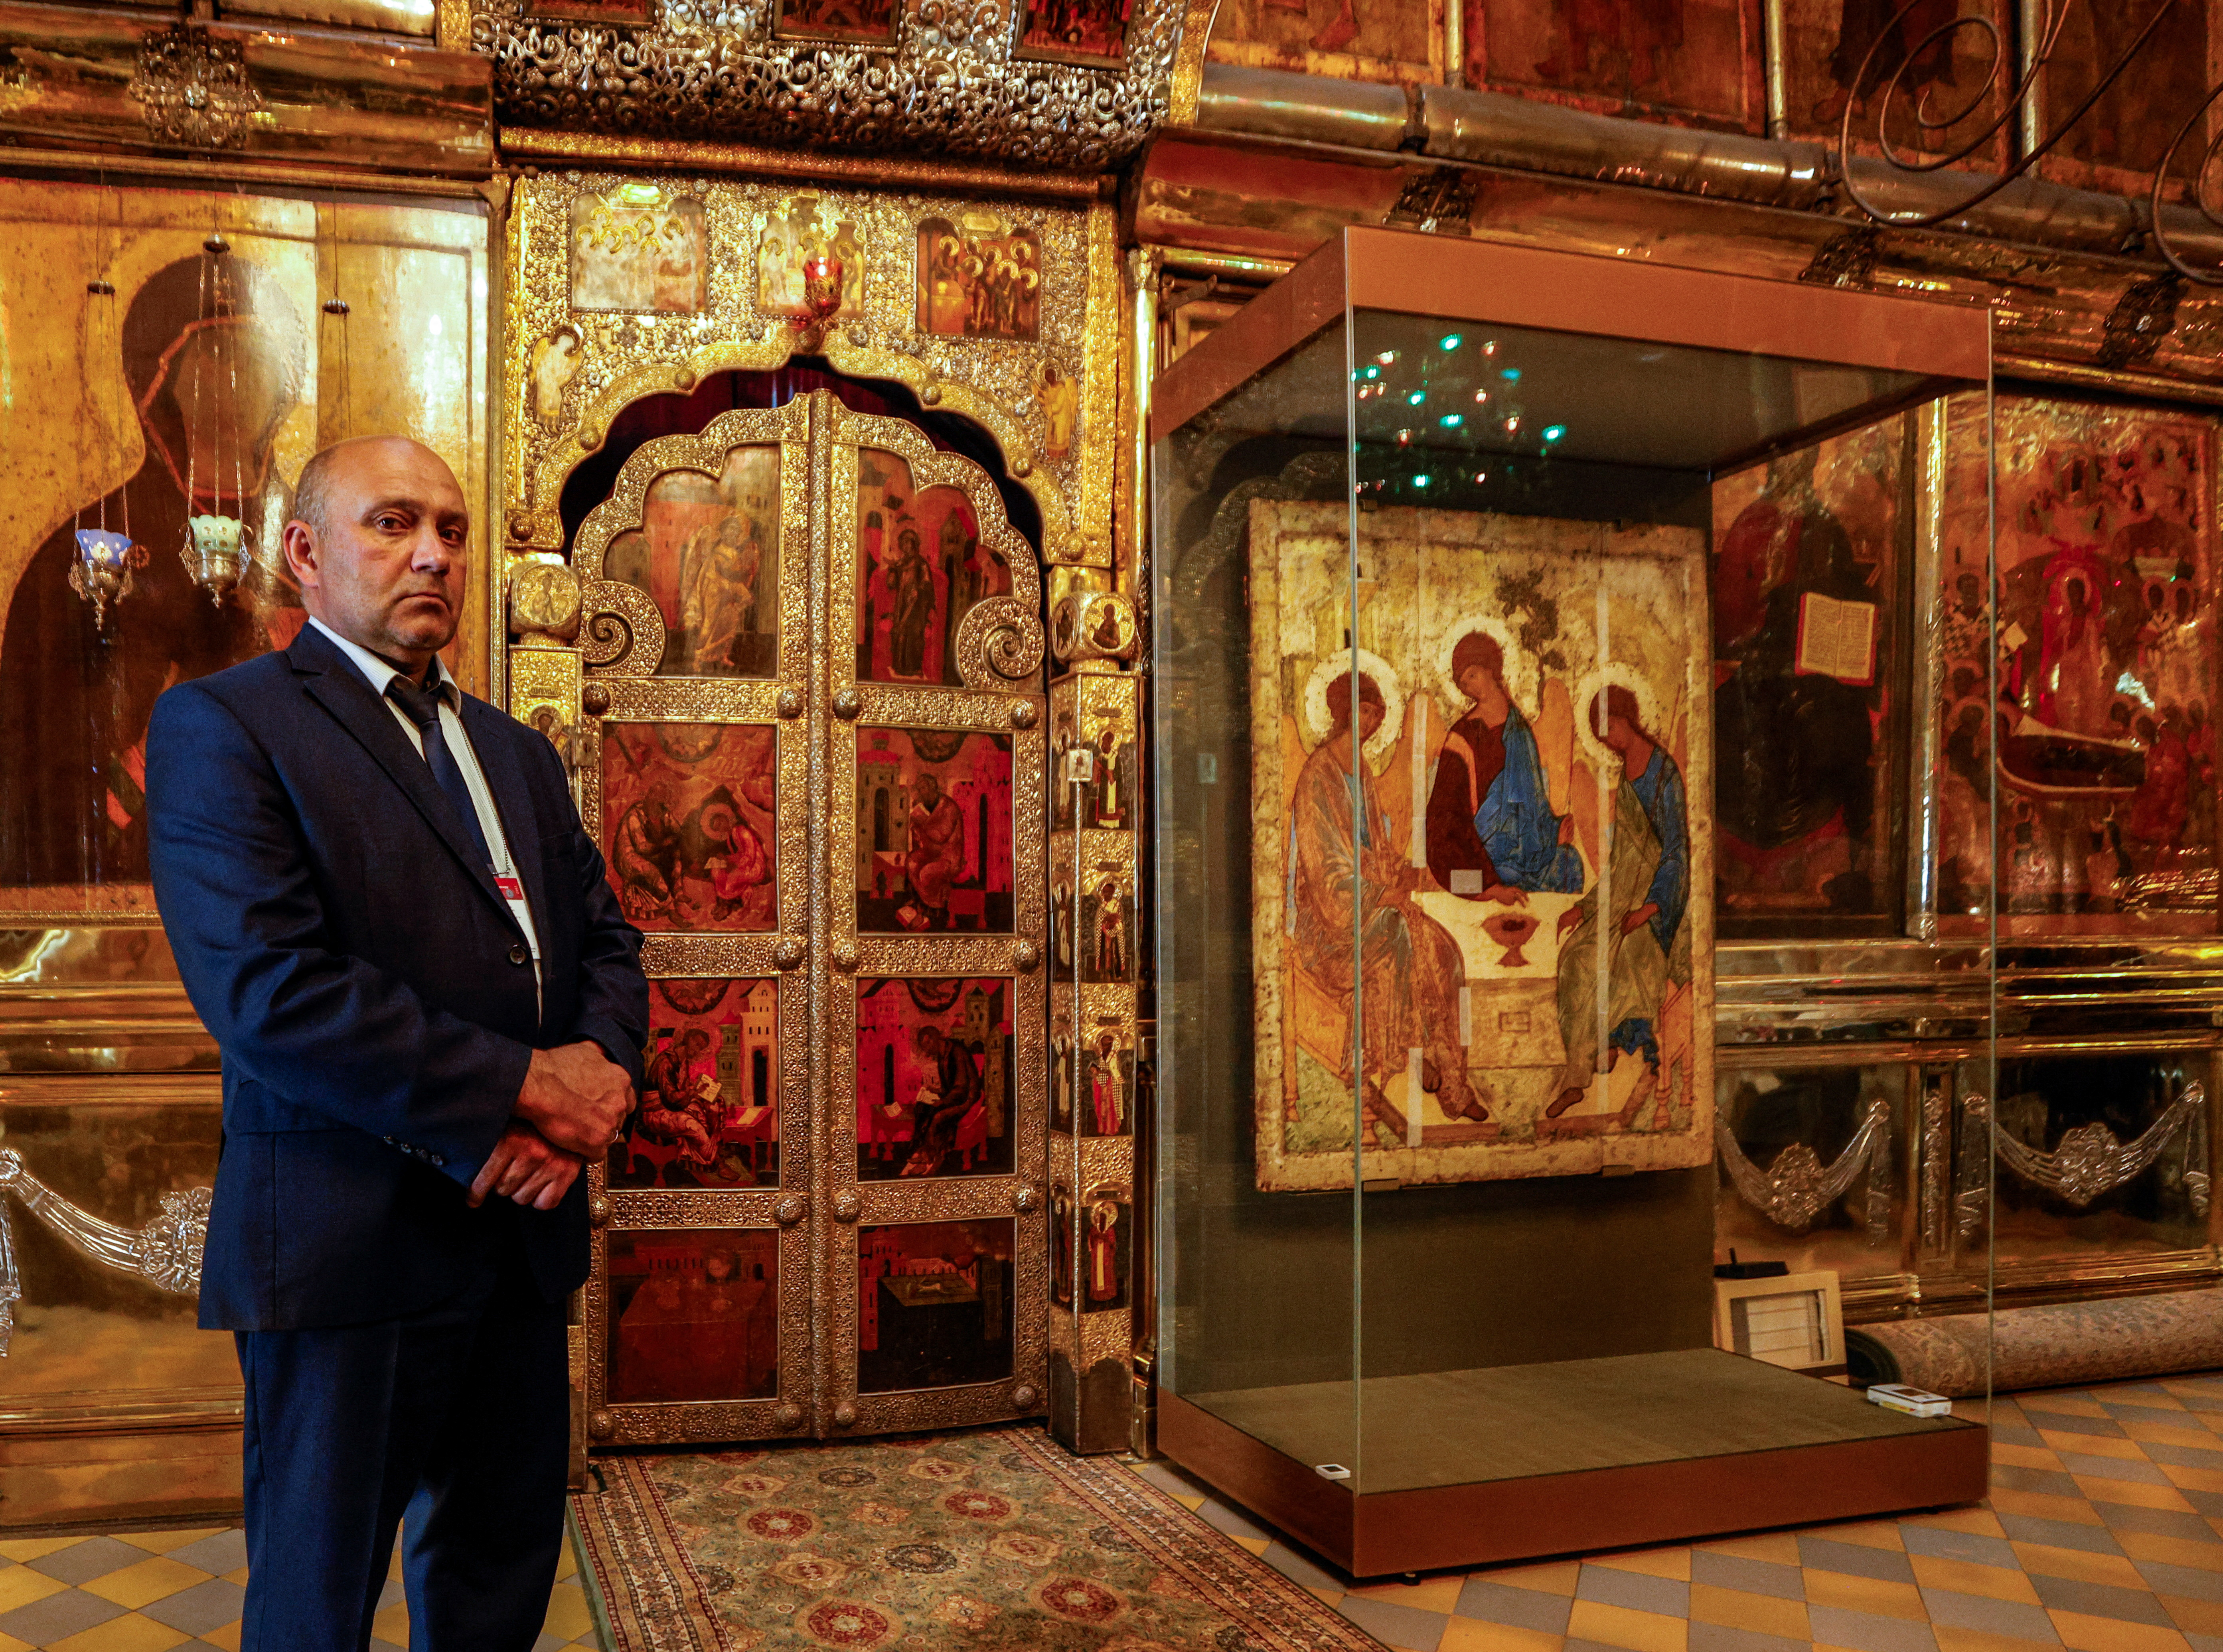 A security guard stands next to the Trinity icon at a cathedral in Sergiyev Posad